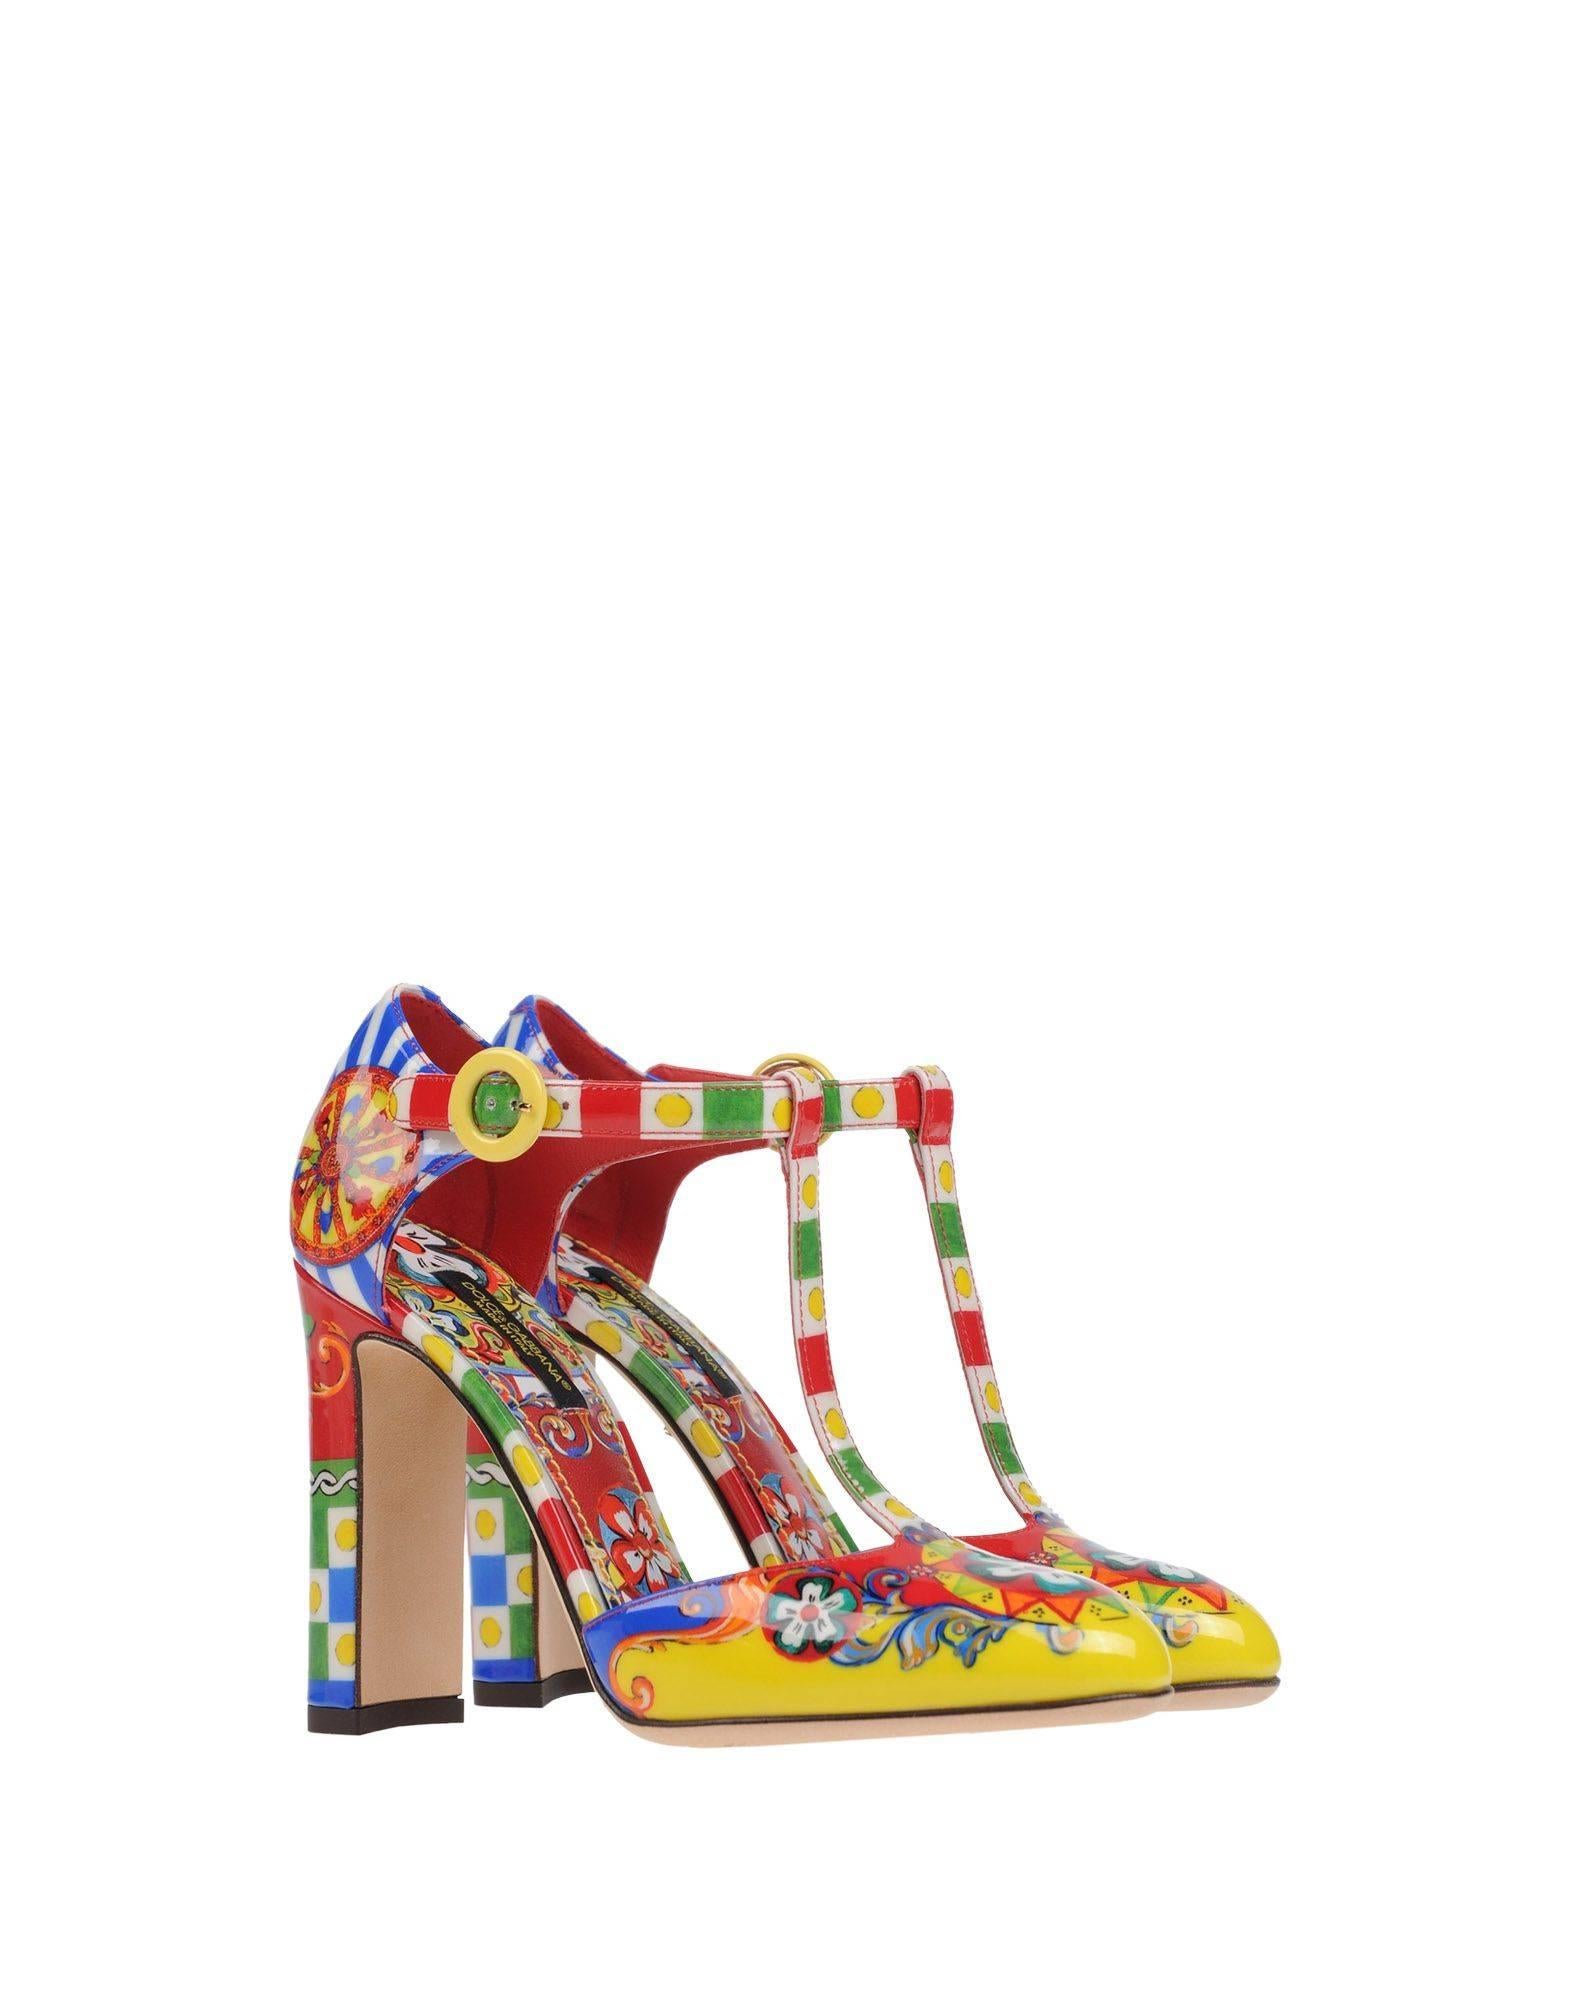 CURATOR'S' NOTES

Dolce & Gabbana NEW & SOLD OUT Runway Multi Color Pumps in Box

Size IT 35.5
Leather
Adjustable ankle strap closure
Made in Italy
Heel height 4"
Includes original Dolce & Gabbana box